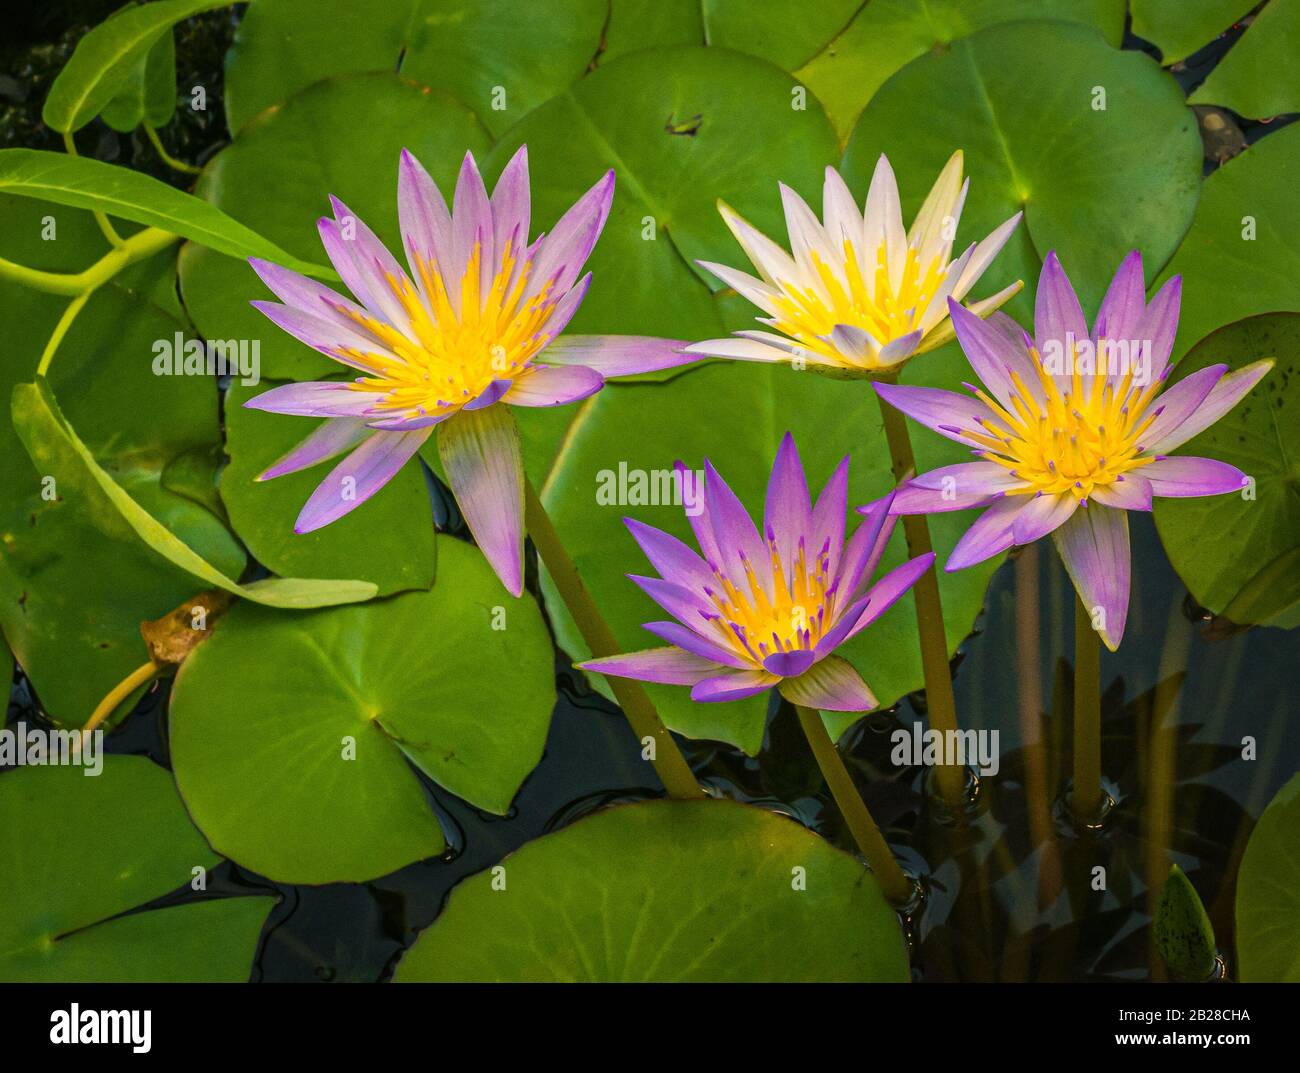 Blue star water lily, or blue lotus flower, Nymphaea stellata, national flower of Sri Lanka Stock Photo